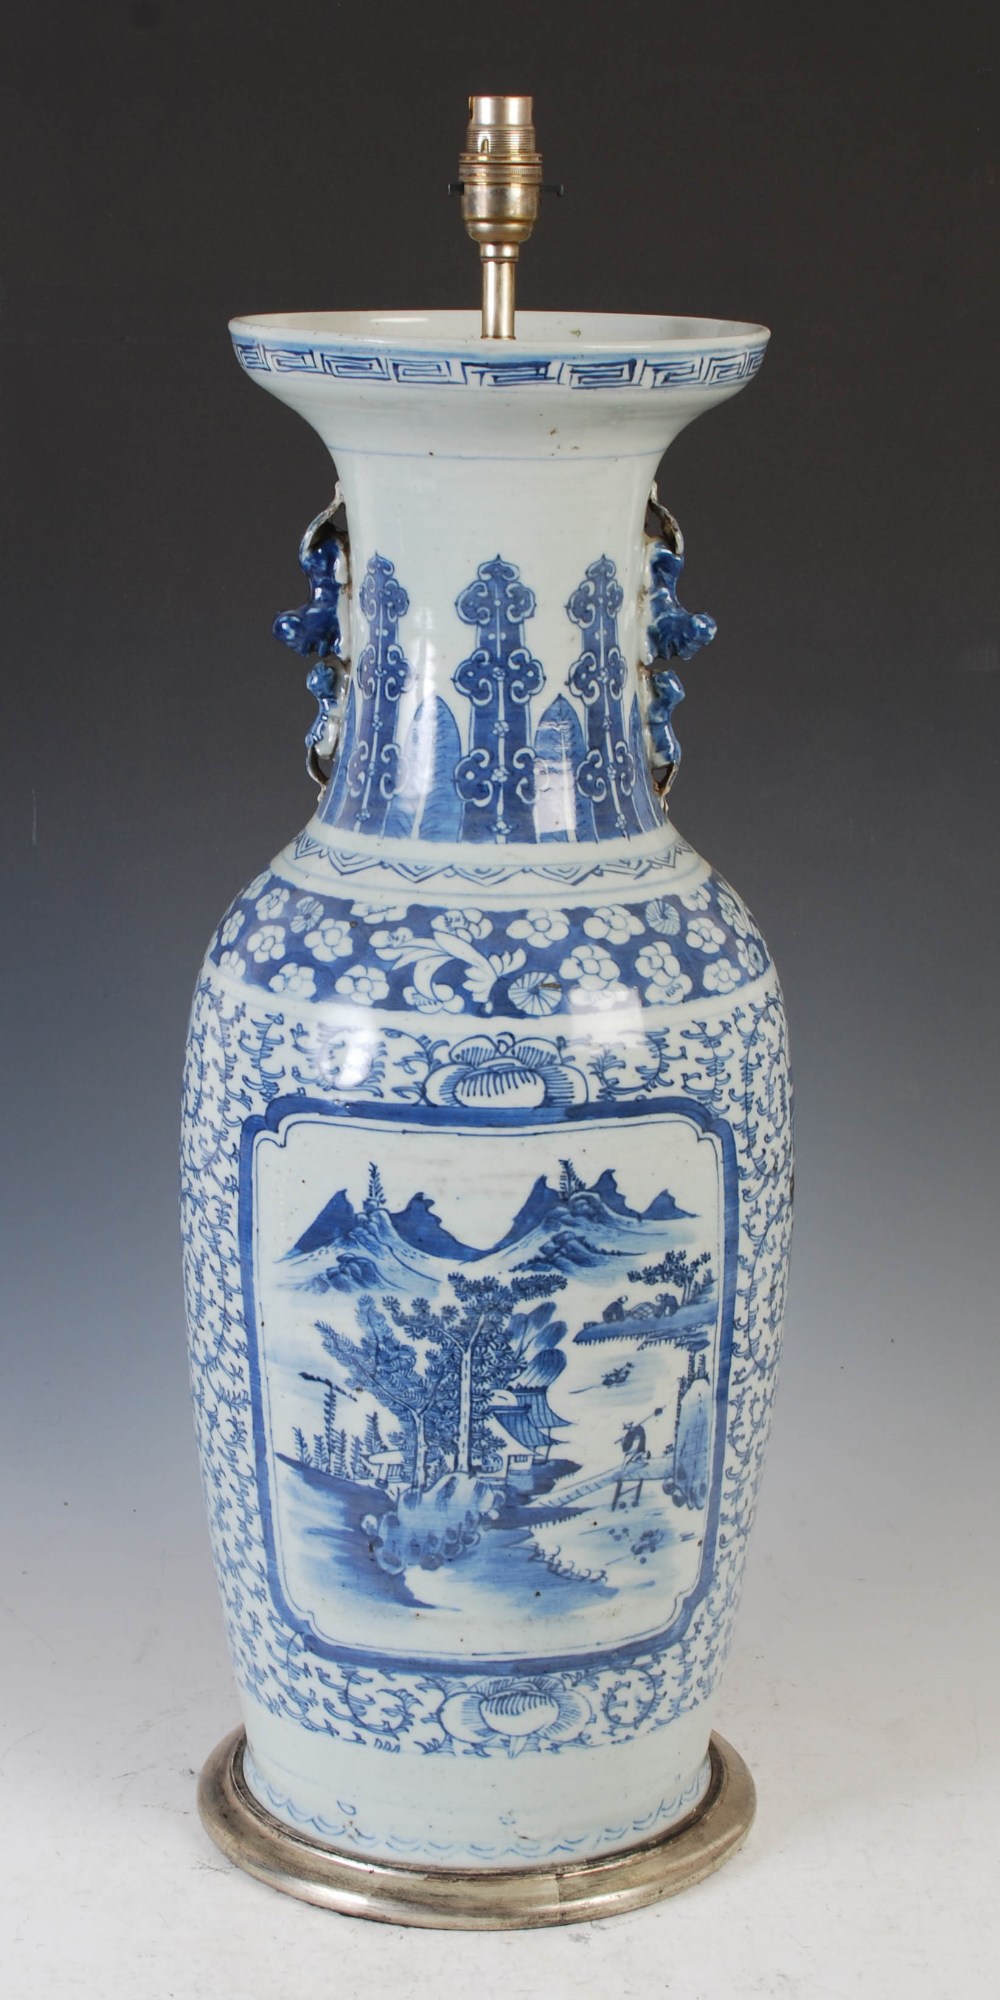 A Chinese porcelain blue and white vase mounted as a table lamp, late Qing Dynasty, decorated with